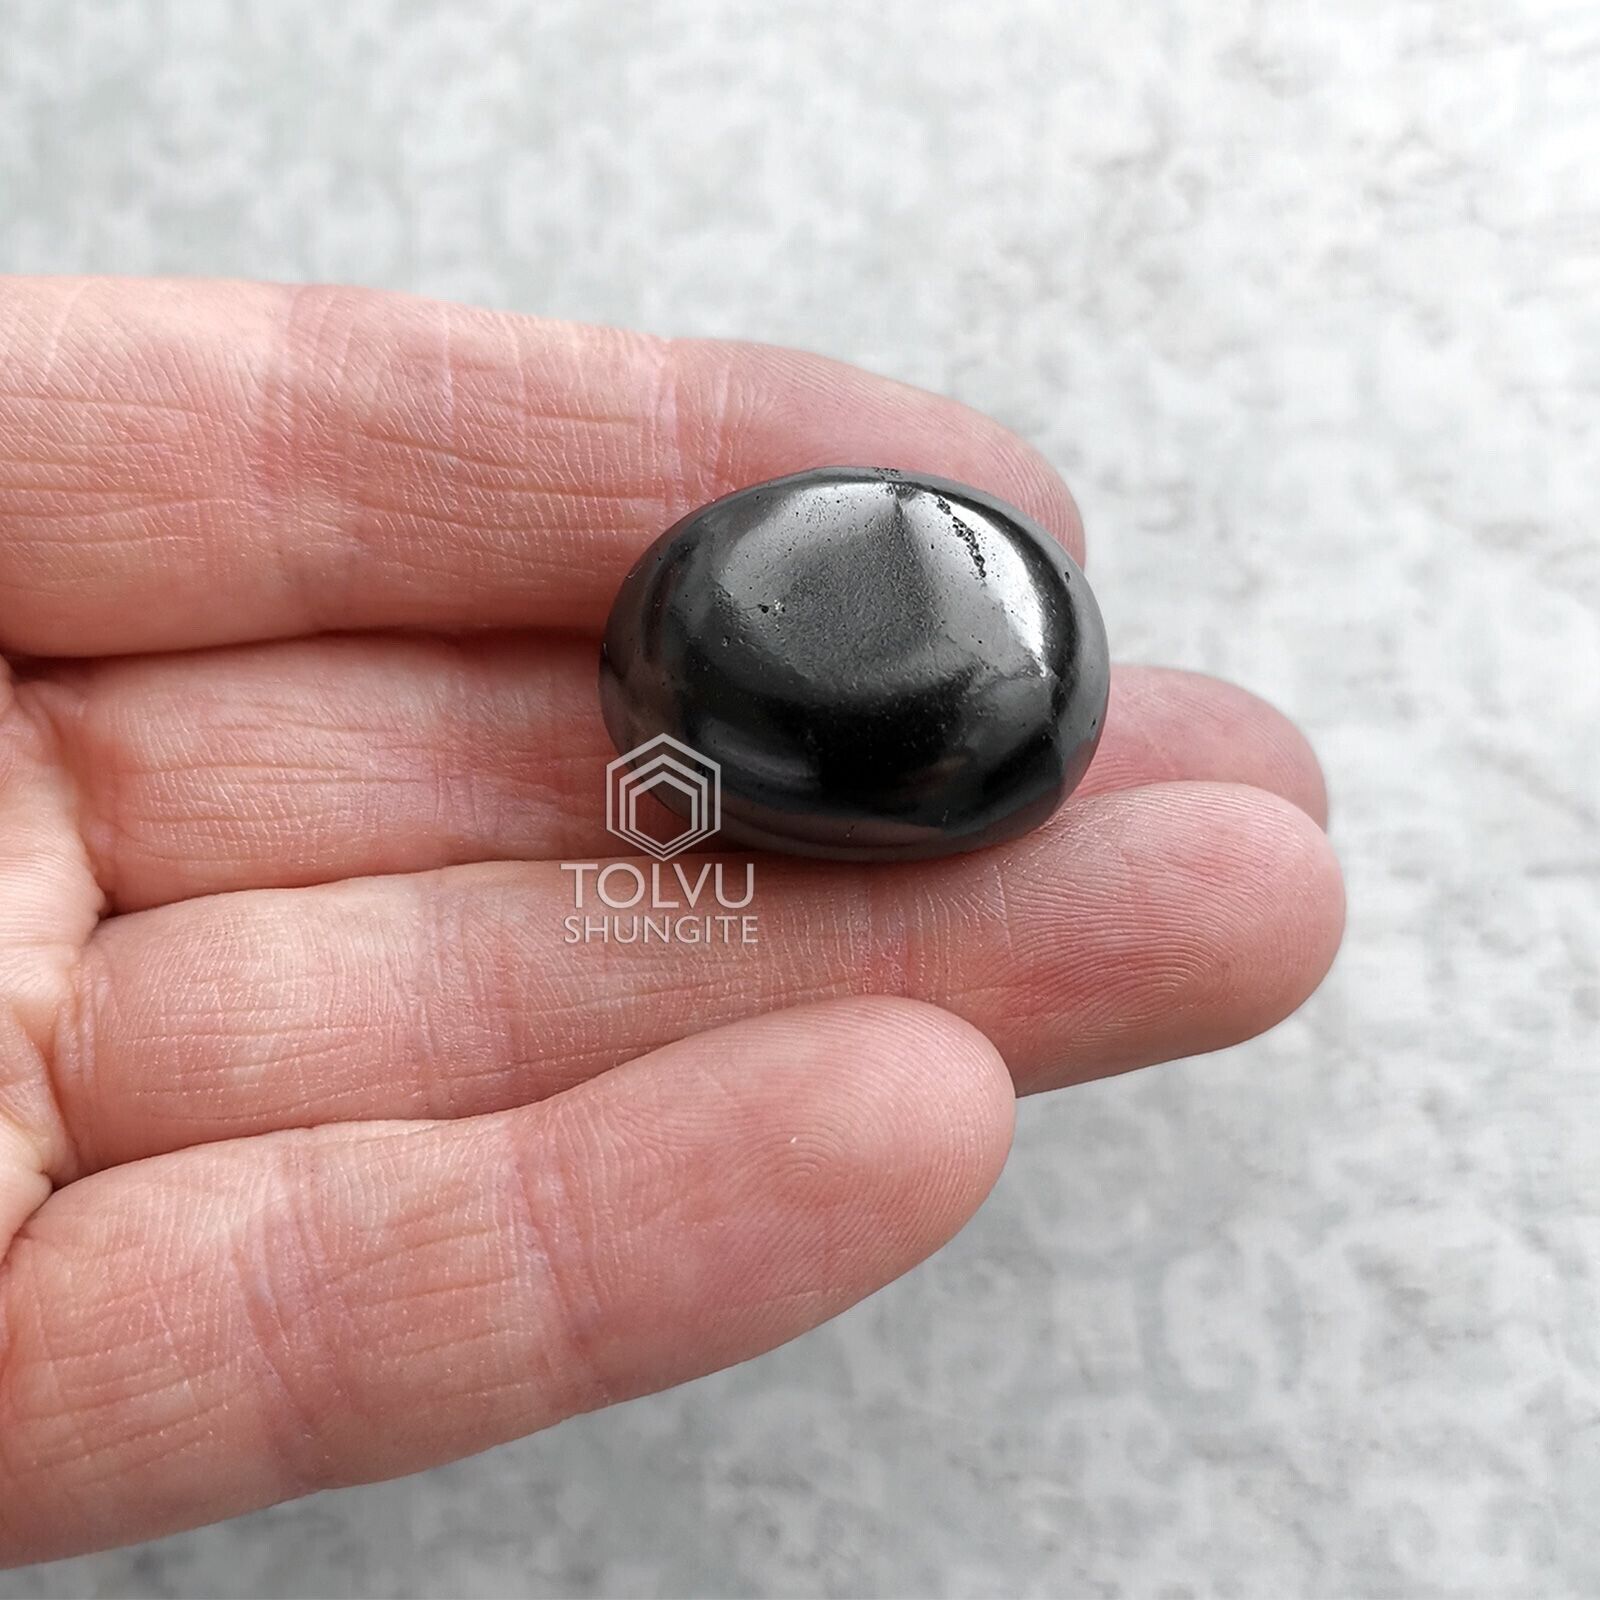 Shungite Stone Authentic Polished Russian black Real mineral from Karelia, Tolvu